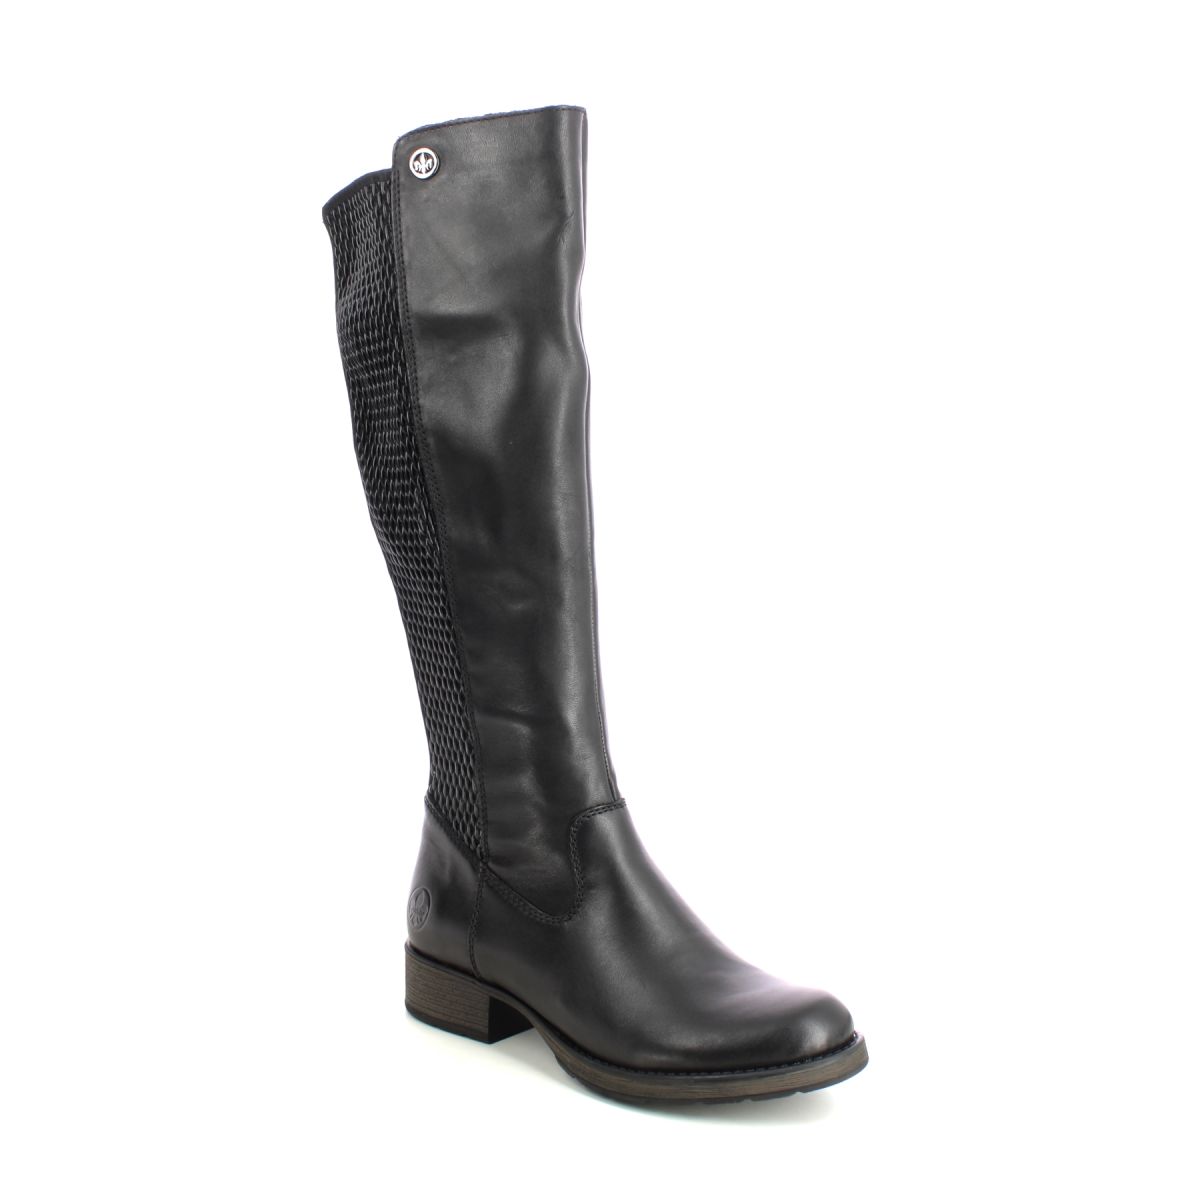 Rieker Indafit Stretch Black Leather Womens Knee-High Boots Z9591-00 In Size 41 In Plain Black Leather